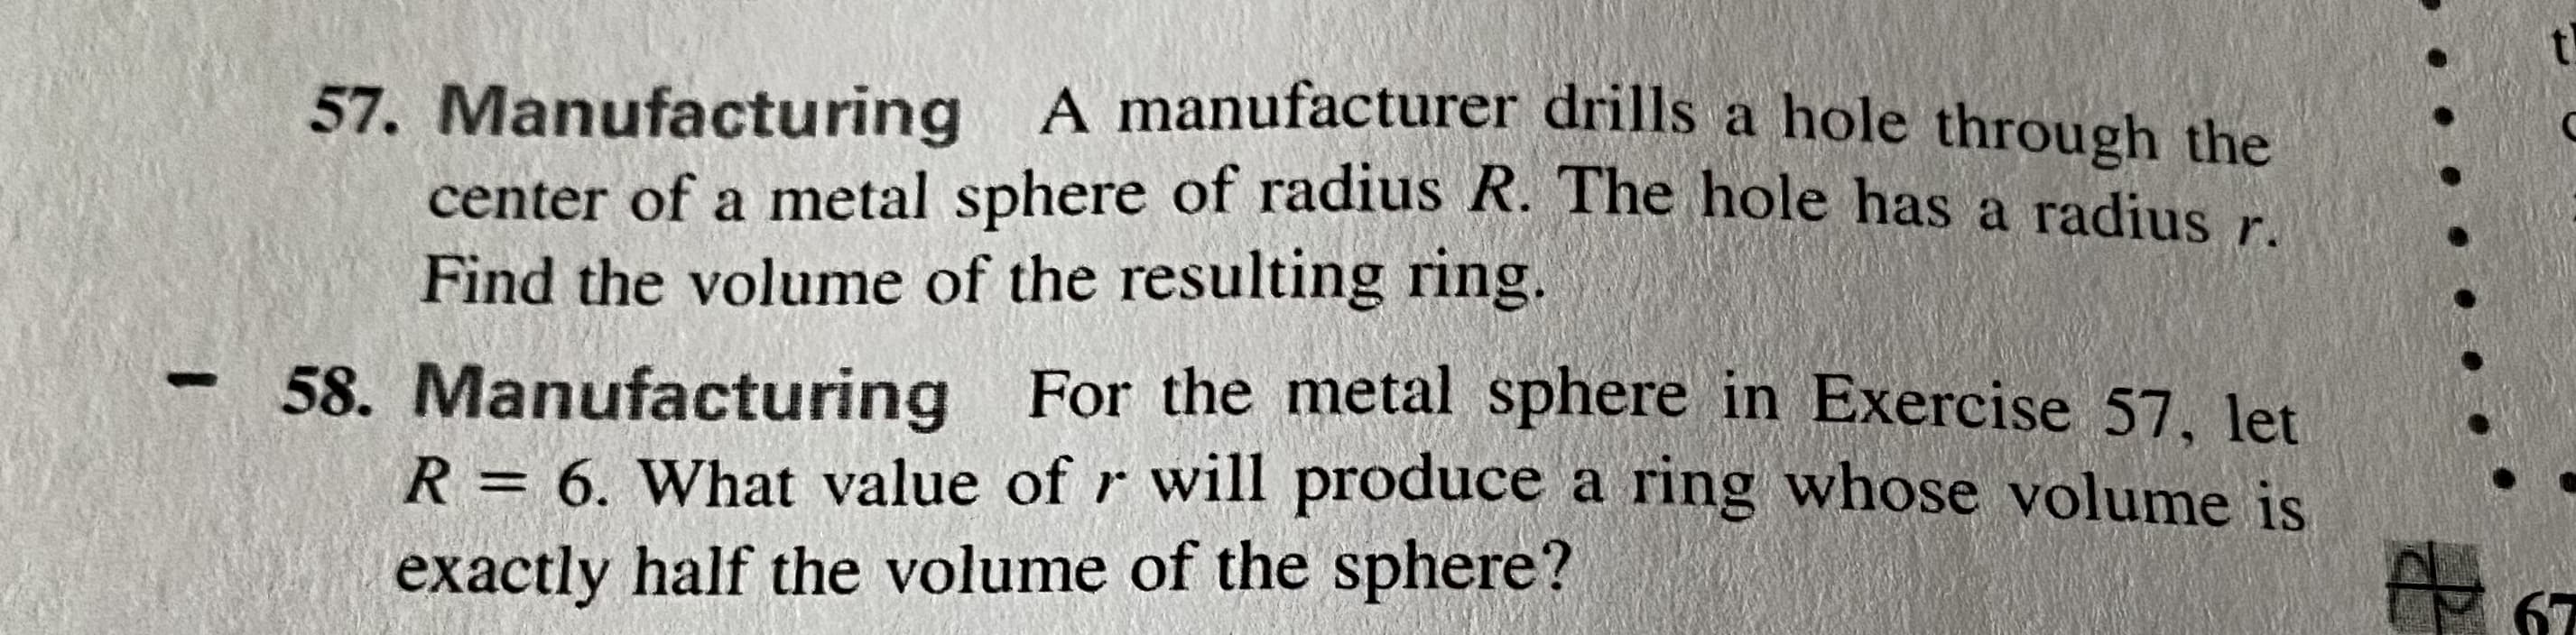 57. Manufacturing A manufacturer drills a hole through the
center of a metal sphere of radius R. The hole has a radius r
Find the volume of the resulting ring.
-58. Manufacturing For the metal sphere in Exercise 57, let
R = 6. What value of r will produce a ring whose volume is
exactly half the volume of the sphere?
%3D
